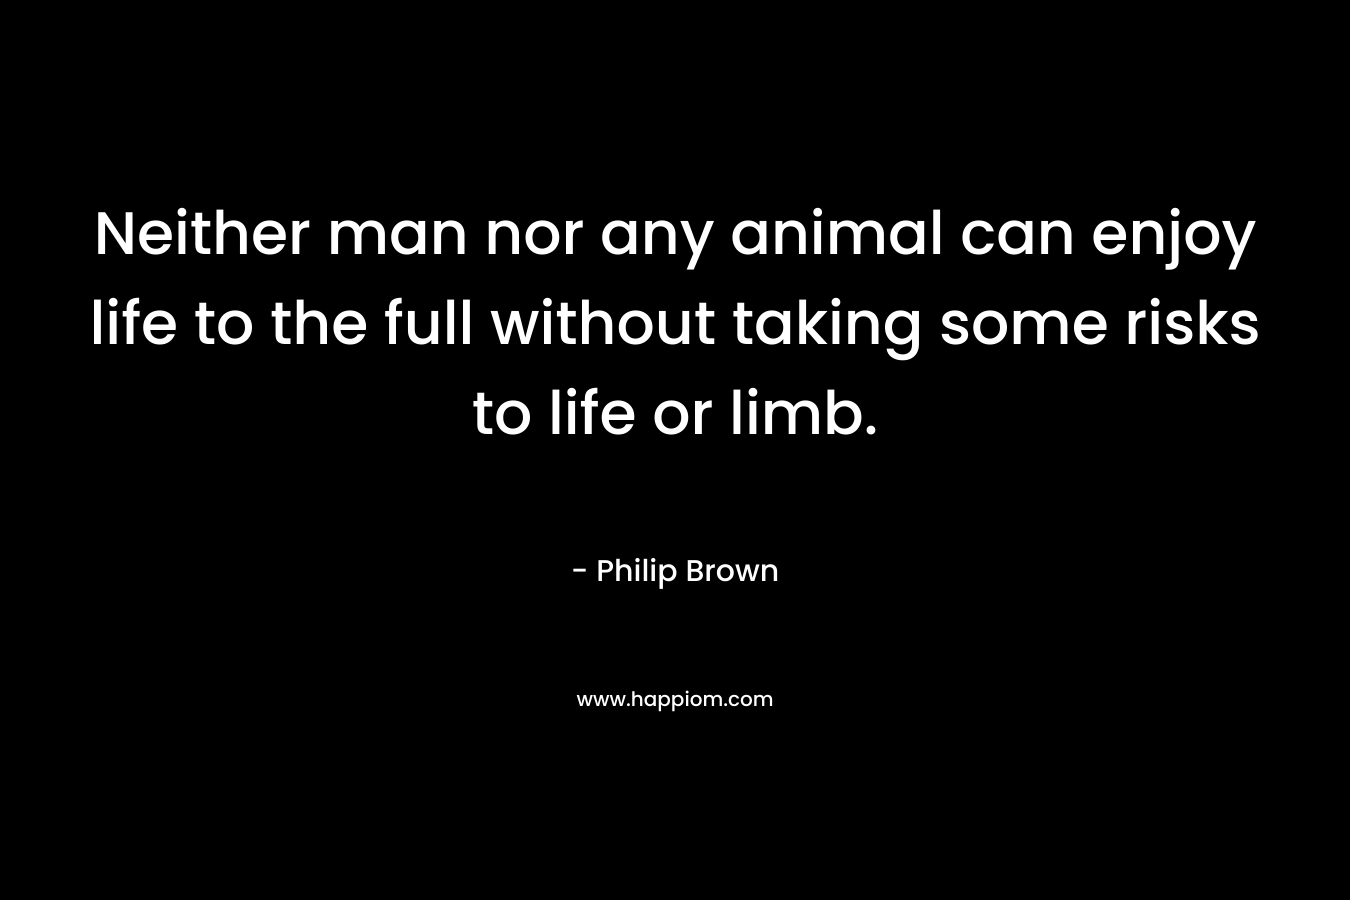 Neither man nor any animal can enjoy life to the full without taking some risks to life or limb. – Philip Brown